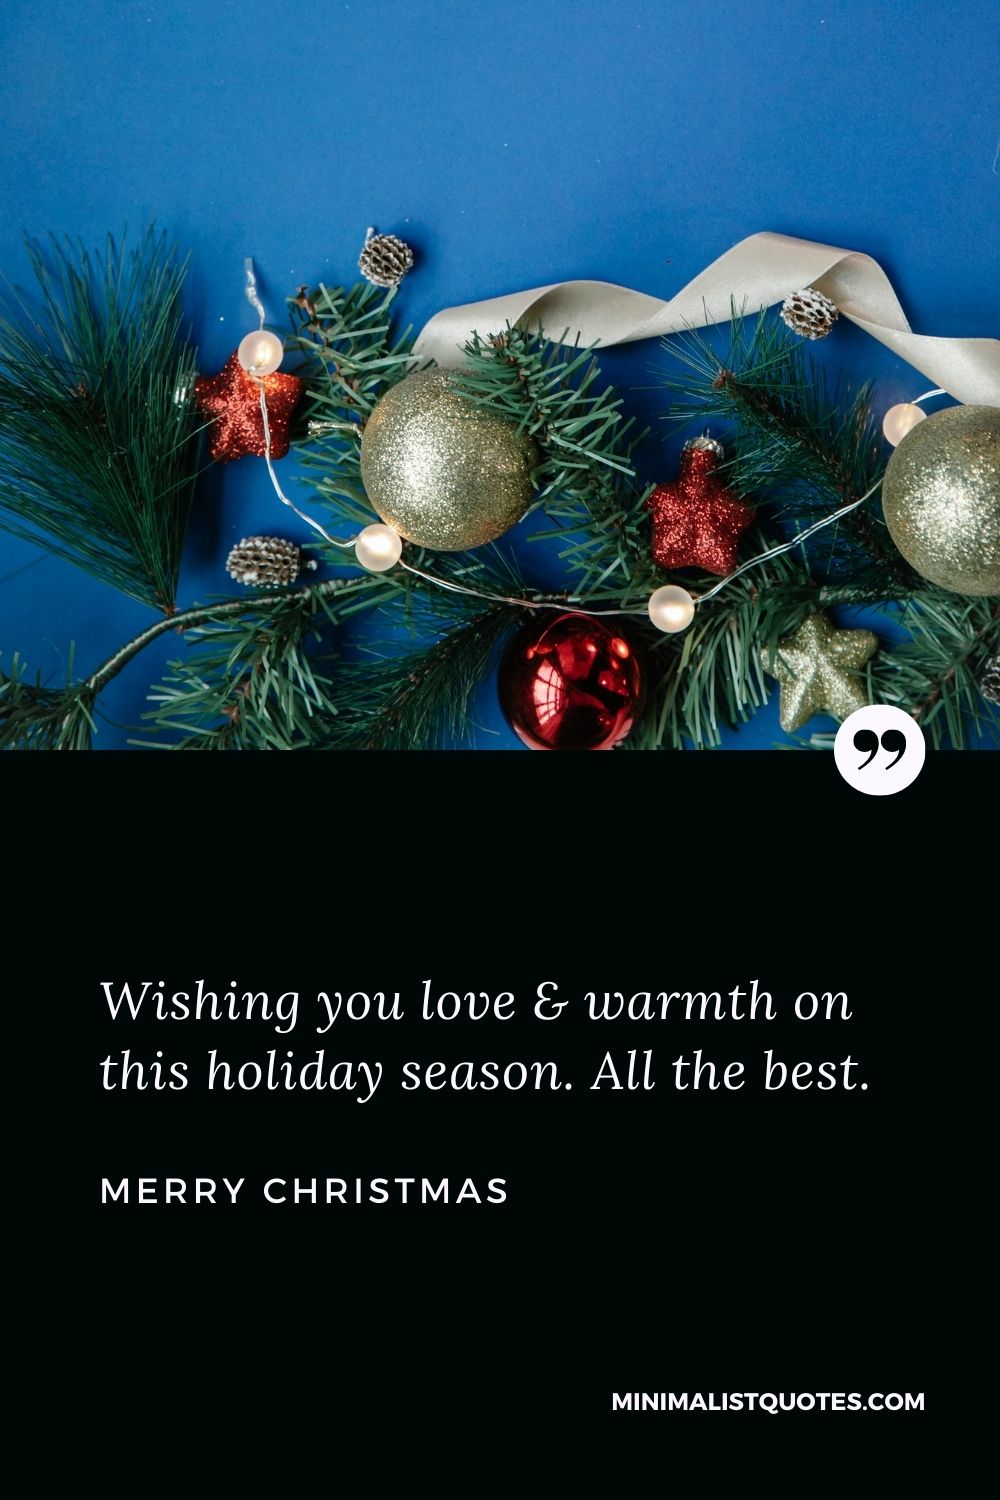 Merry Christmas Wish - Wishing you love & warmth on this holiday season. All the best.